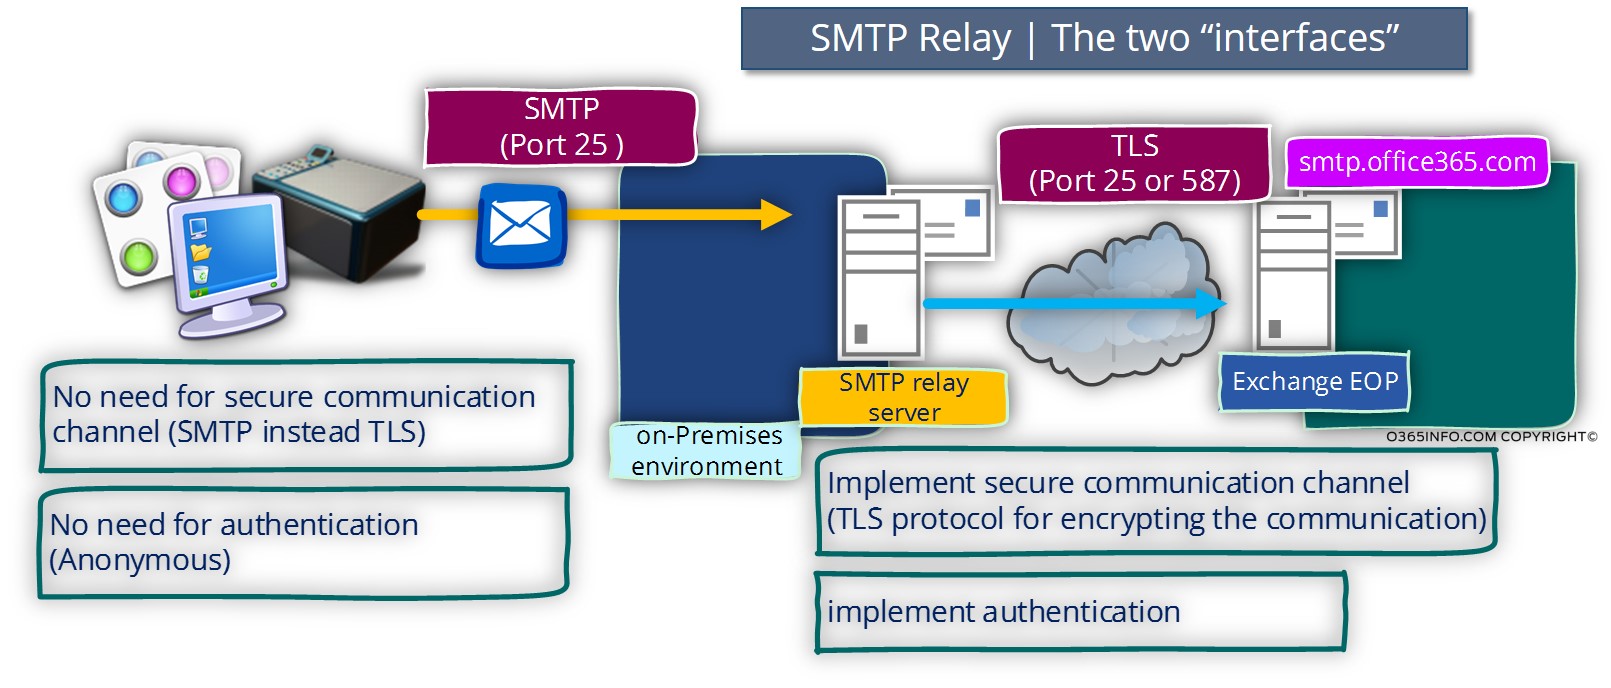 SMTP Relay - The two interfaces